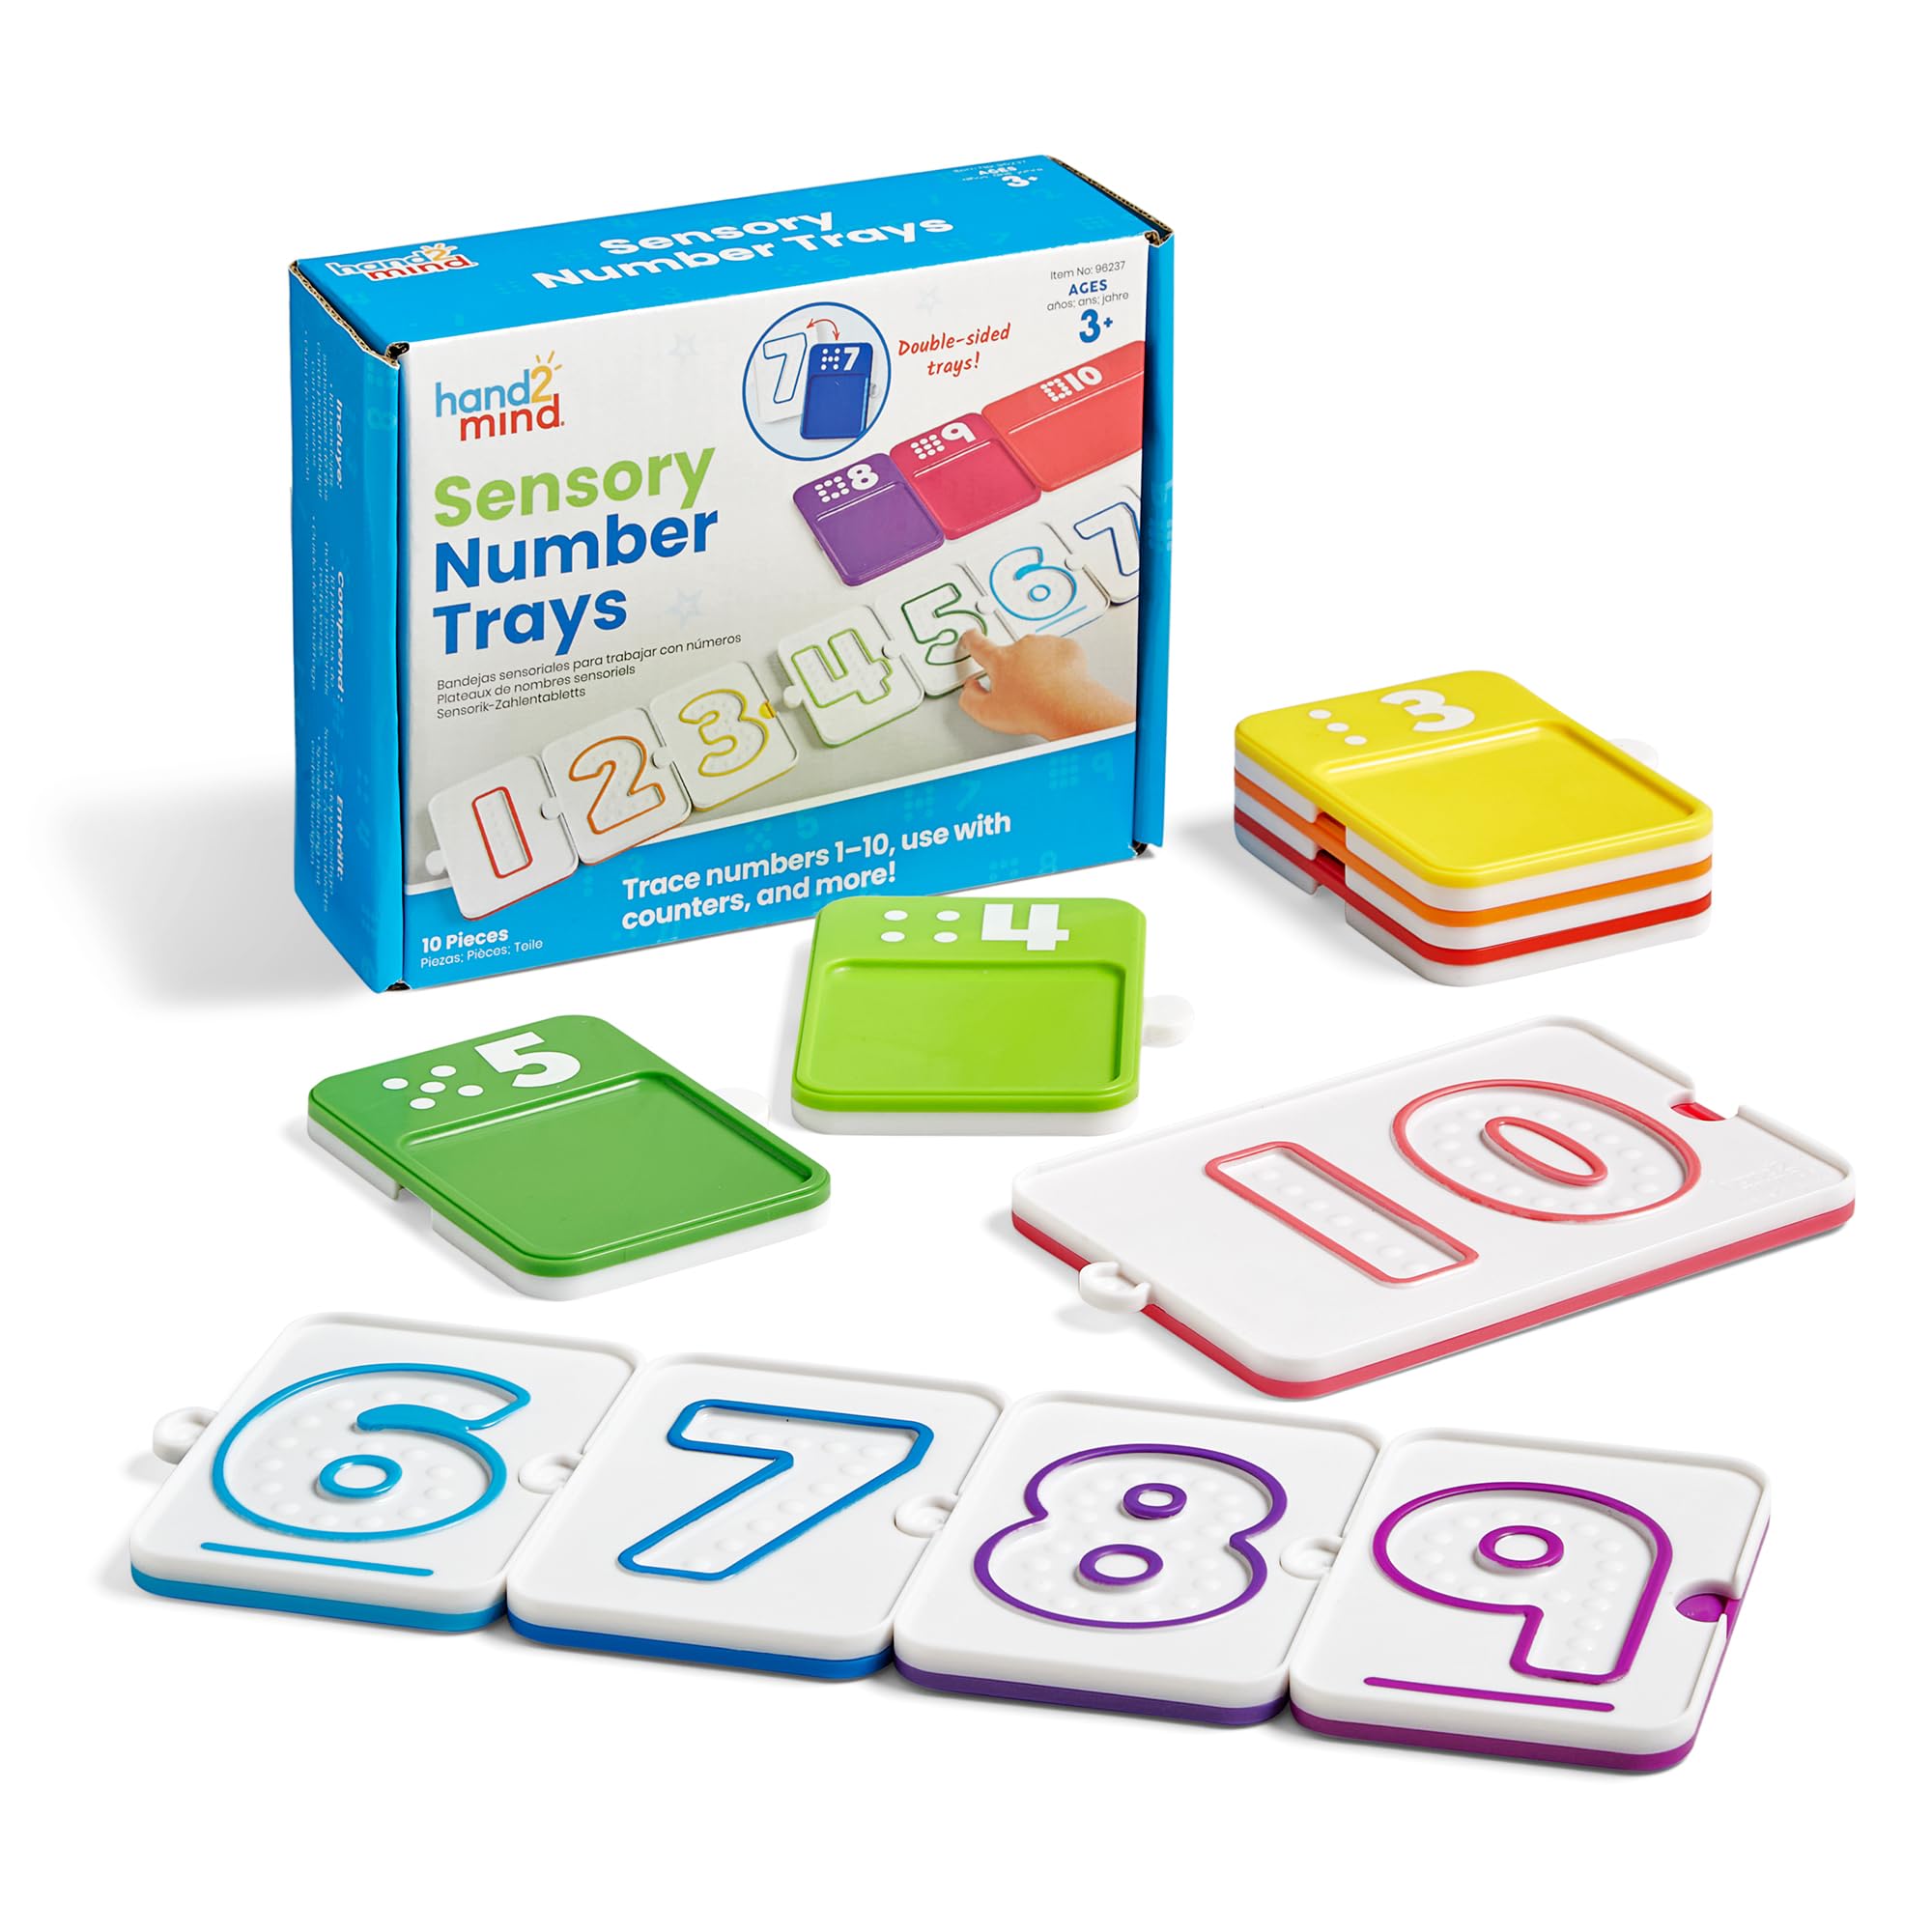 hand2mind Sensory Number Trays, Learning Numbers for Kids, Fine Motor Activities, Counting Toys for Sensory Seeking Kids, Texture Toys, Pre-Writing Skills for Toddlers, Montessori Math Materials